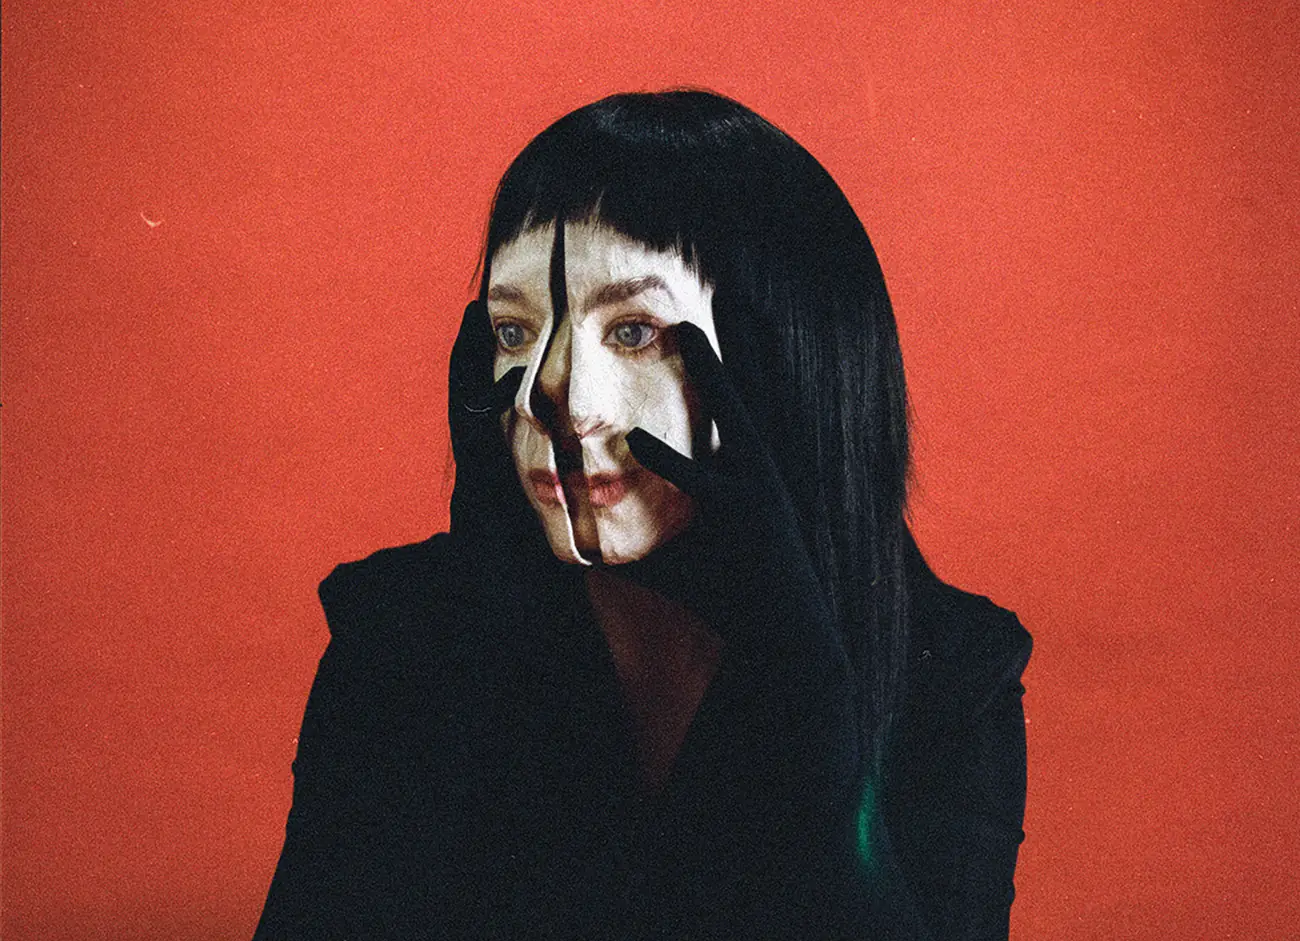 ALBUM REVIEW: Allie X – Girl With No Face